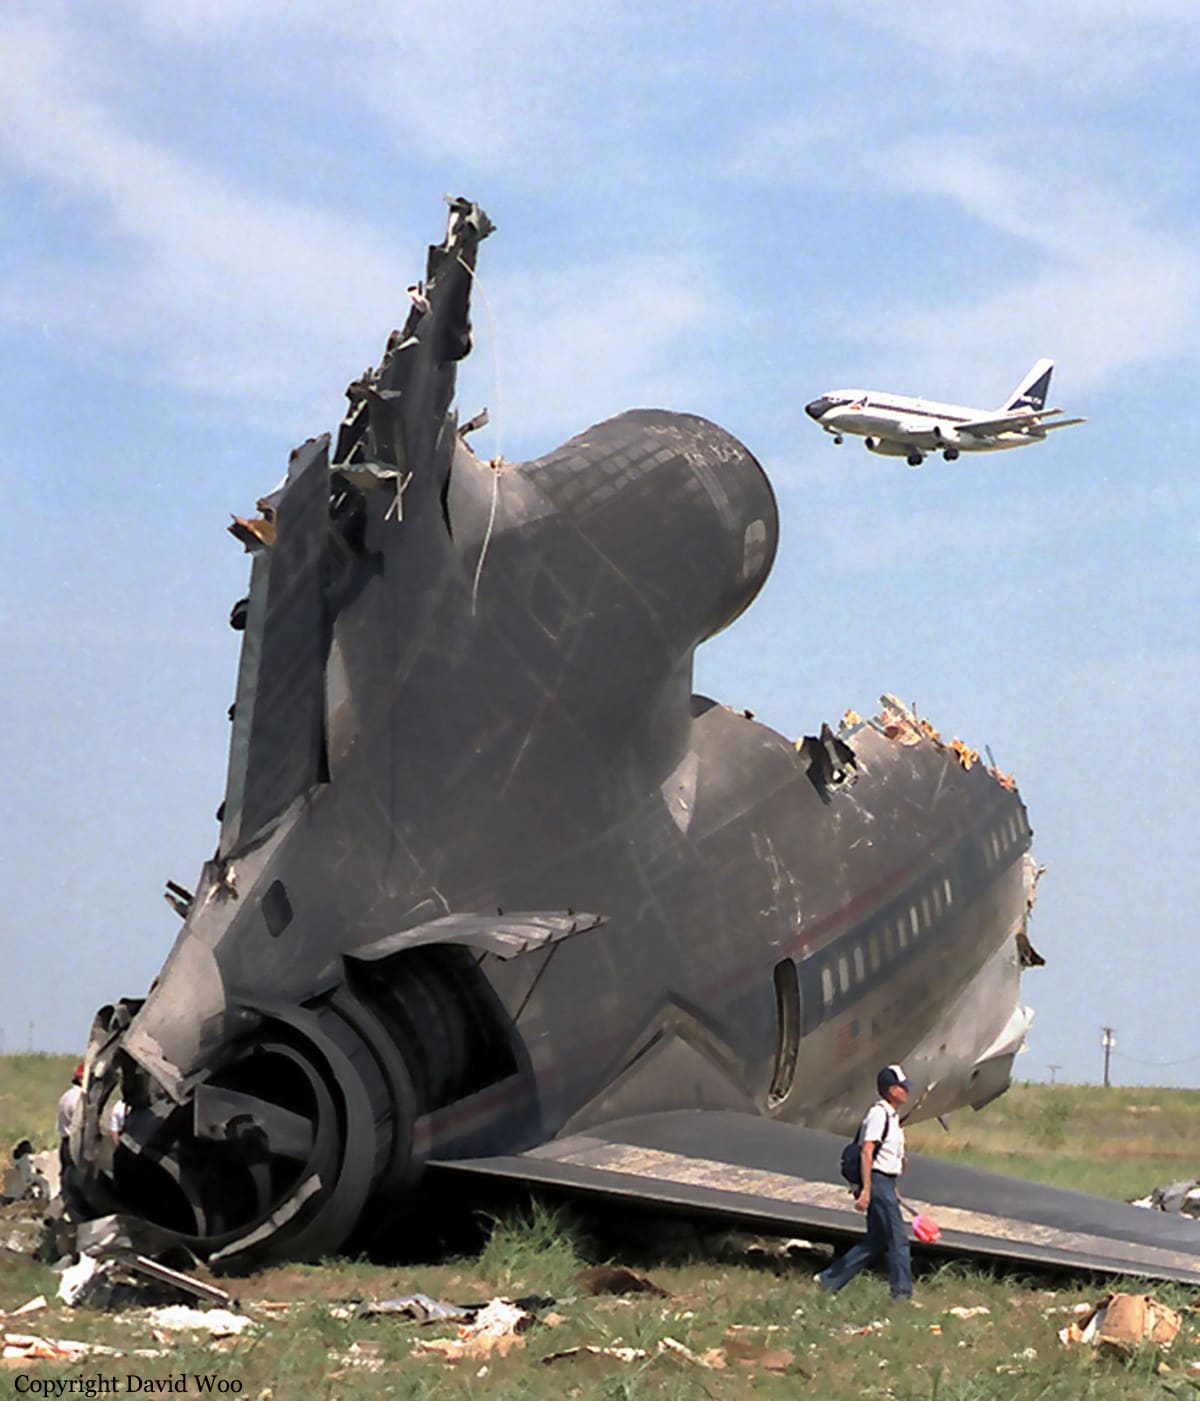 The remains of a Lockheed L-1011 Tristar airliner after encountering microburst-induced wind shear while on approach to Dallas-Fort Worth International Airport (8/1/1985). The accident claimed 137 lives, and led to the development of an onboard wind shear detection and alerting system